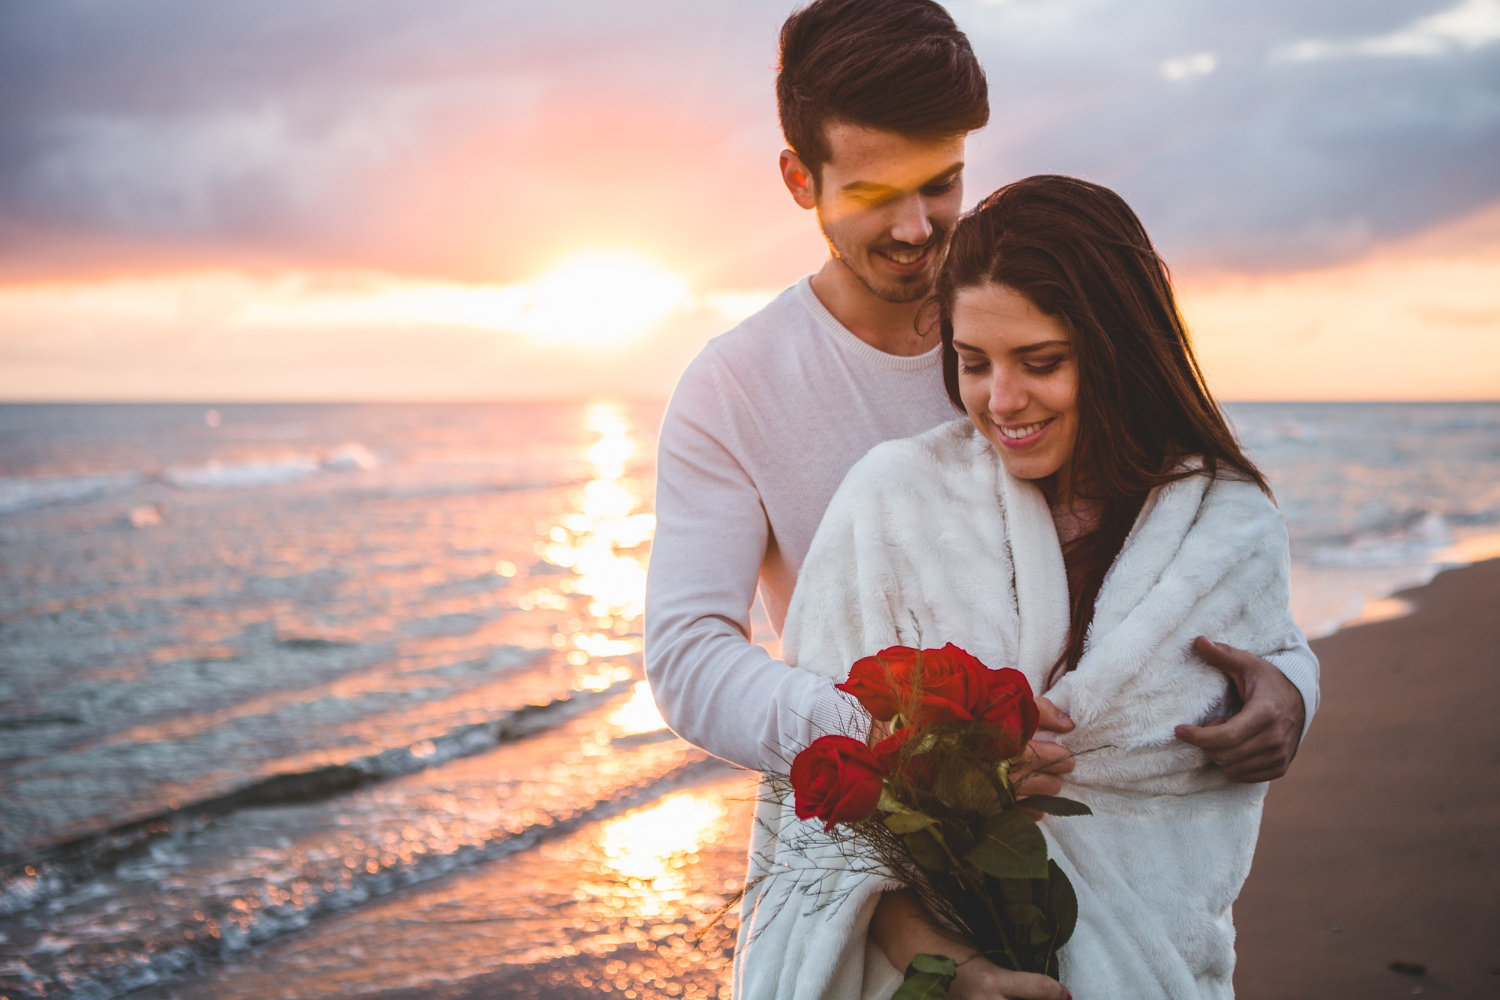  A romantic sunset image by the beach, symbolizes the love and warmth shared in a marriage.